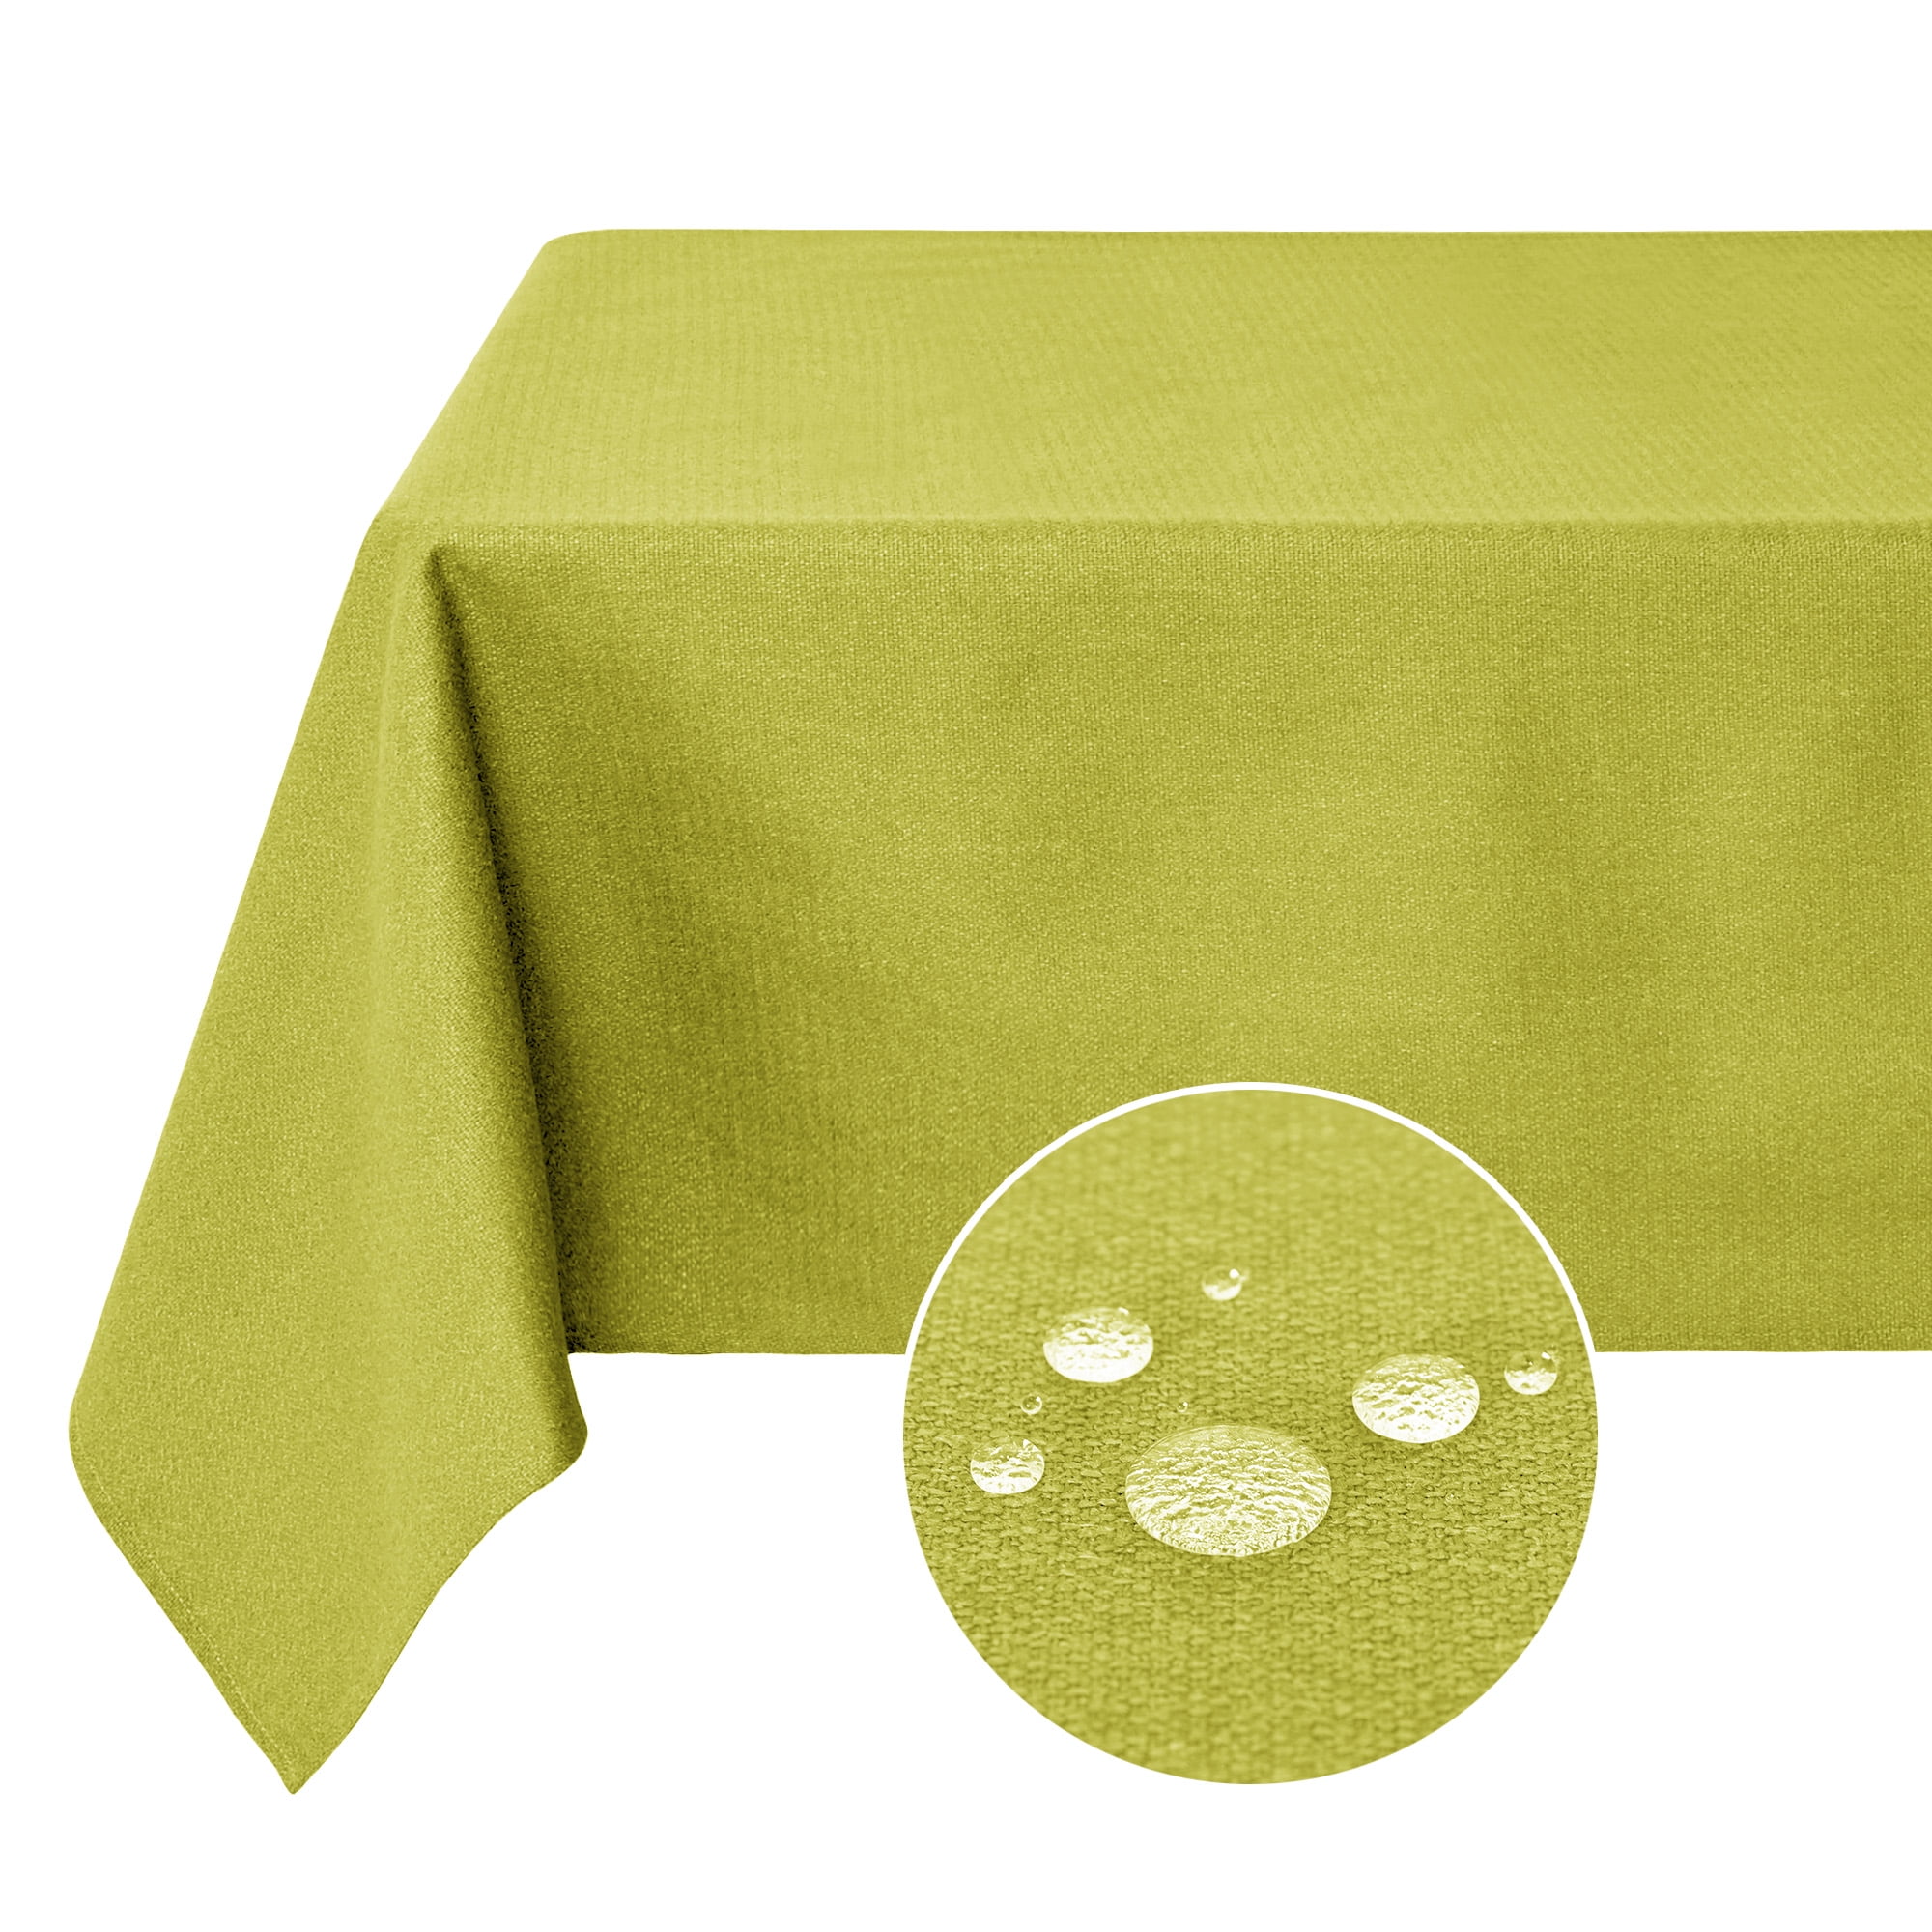 Guoduo Series New Tablecloth Waterproof Disposable Tablecloth Tea